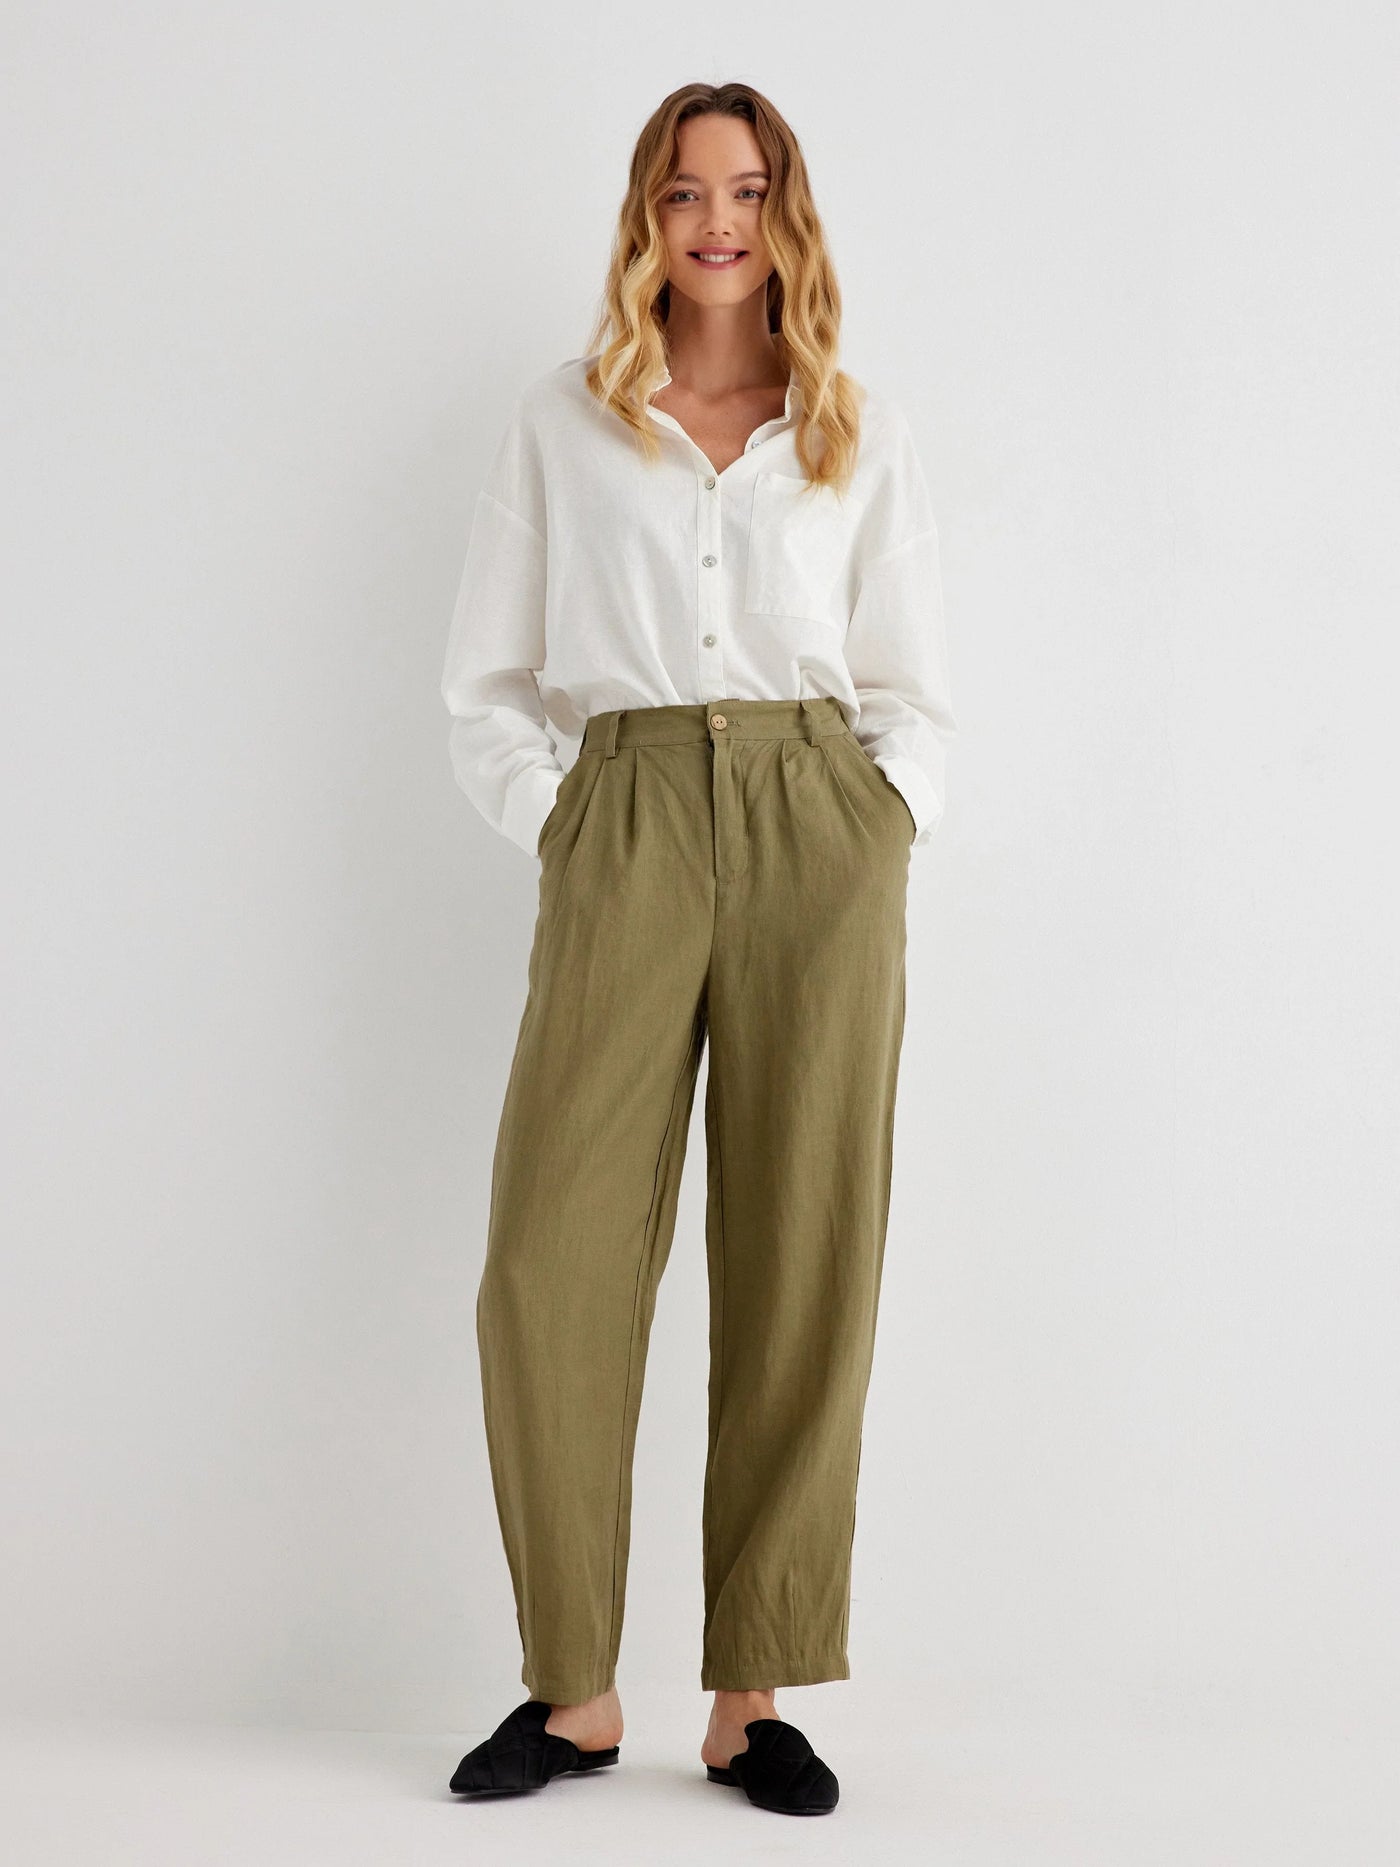 Rory 100% Linen Relaxed Fit Straight Leg Ankle Pants